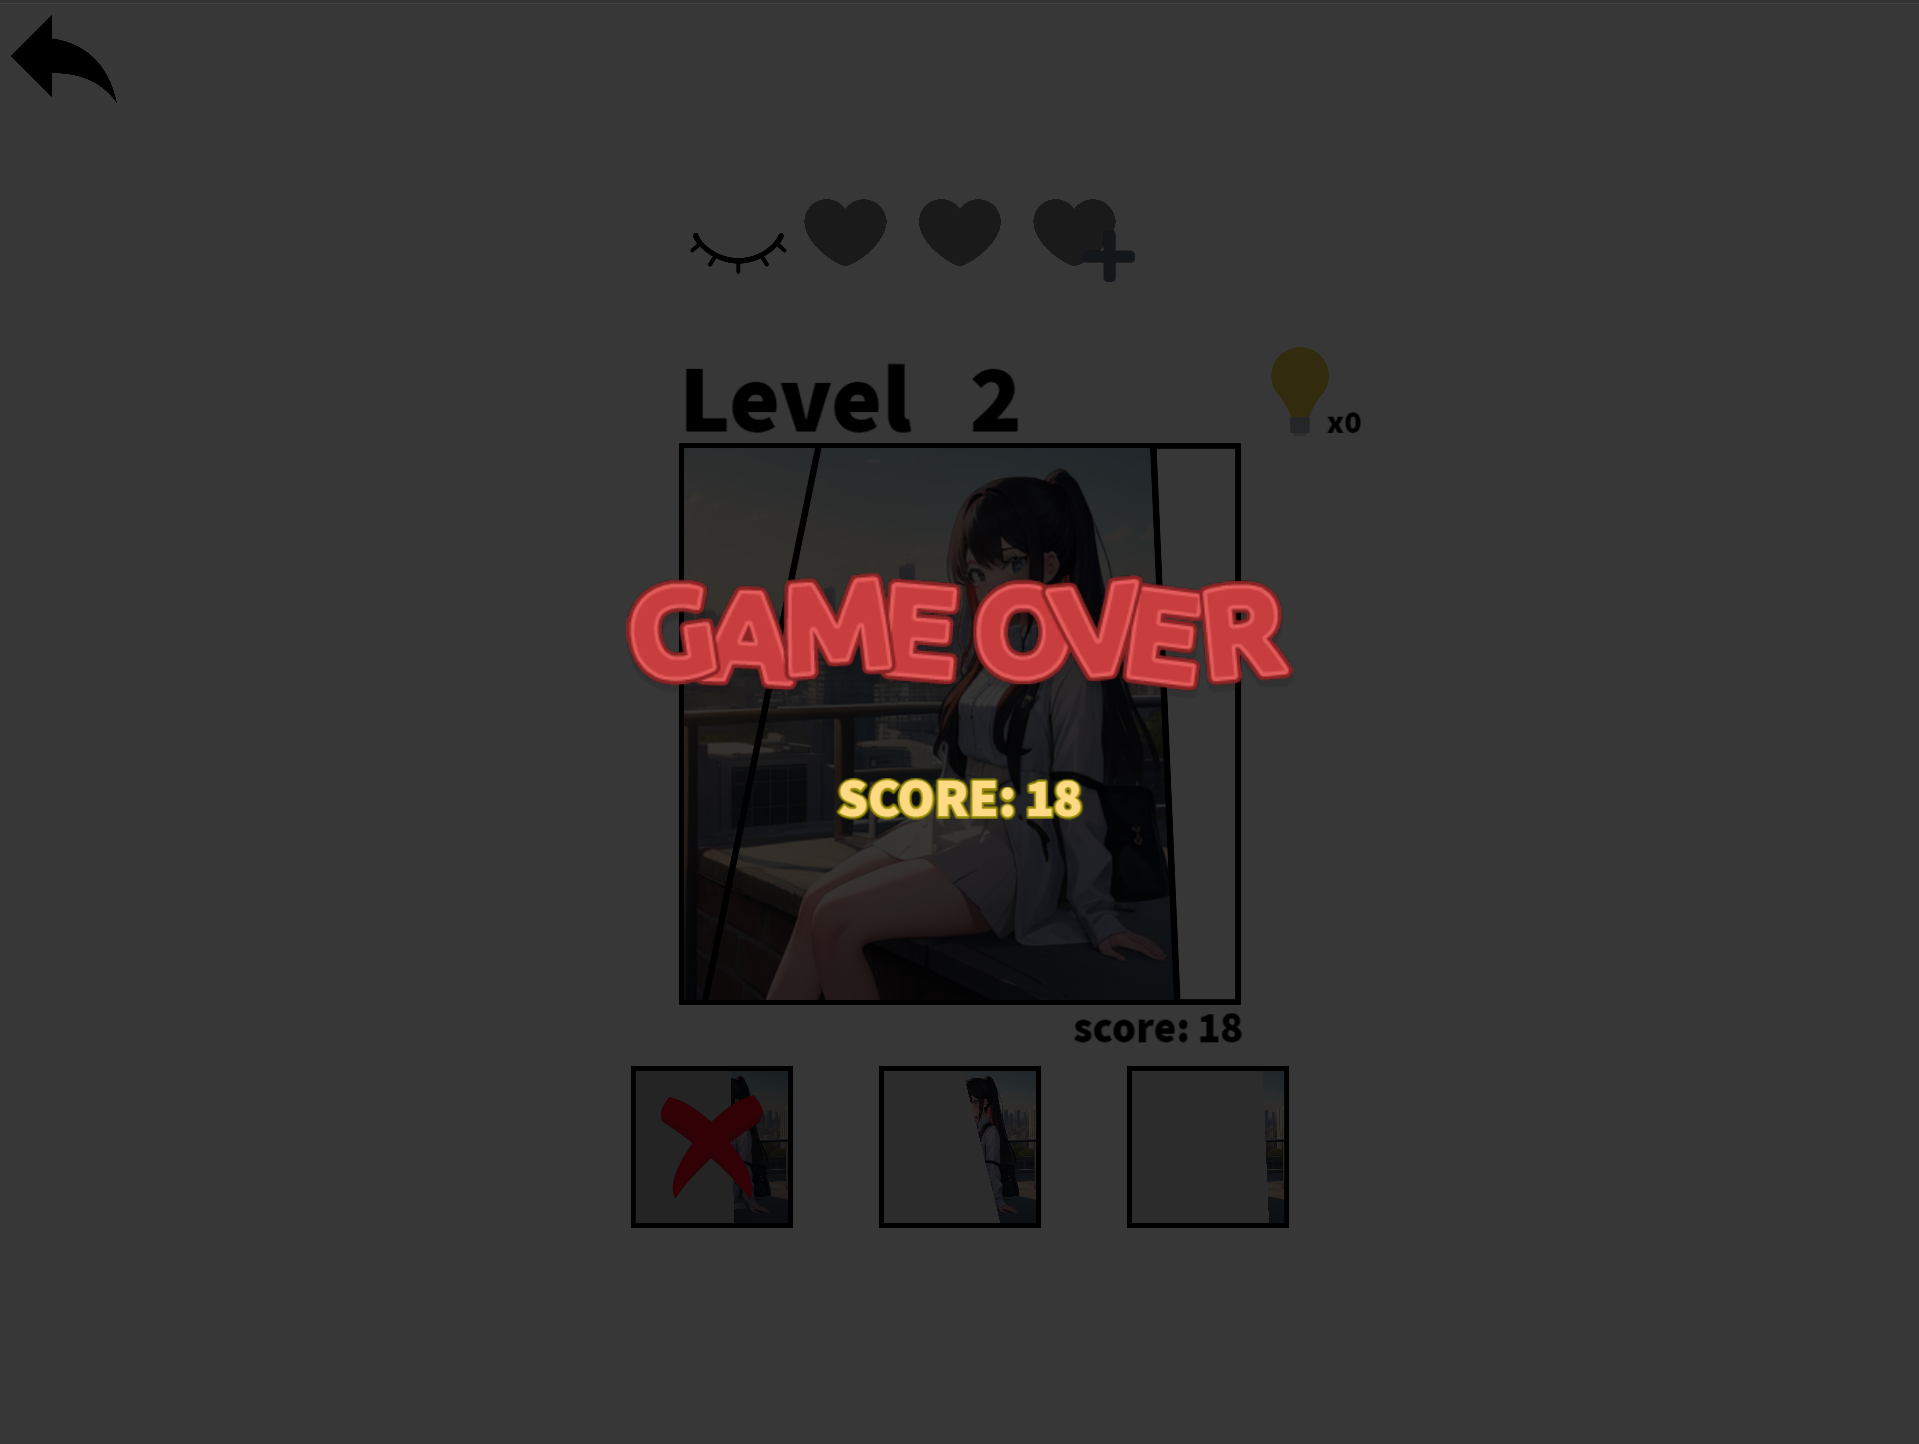 Game Over: Level 2 